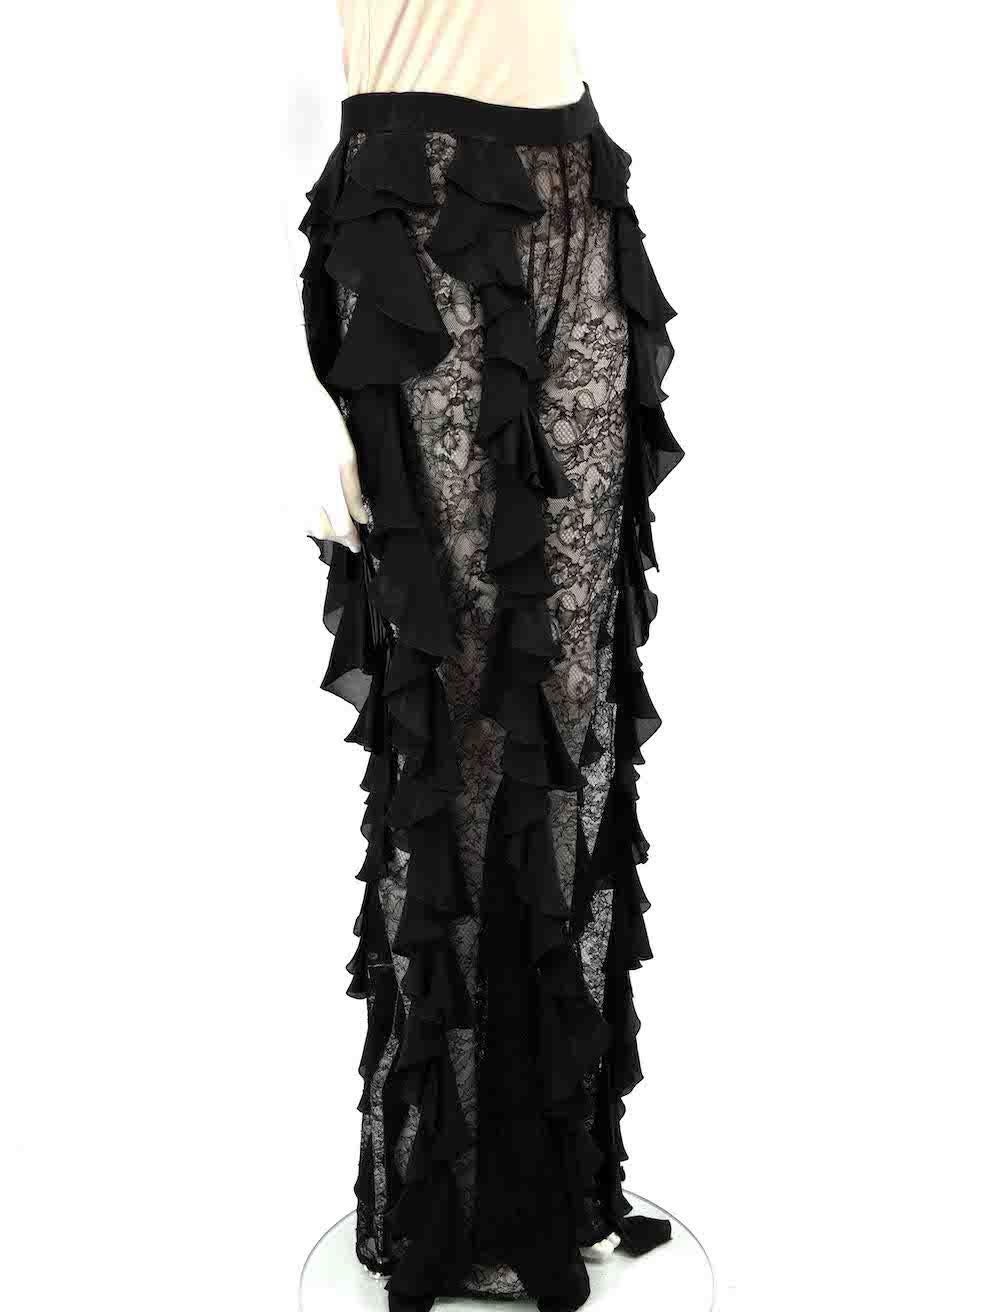 CONDITION is Very good. Minimal wear to trousers is evident. Minimal wear to the cuff ruffles with plucks and abrasions. The composition label has also been removed on this used Balmain designer resale item.
 
 
 
 Details
 
 
 Black
 
 Lace
 
